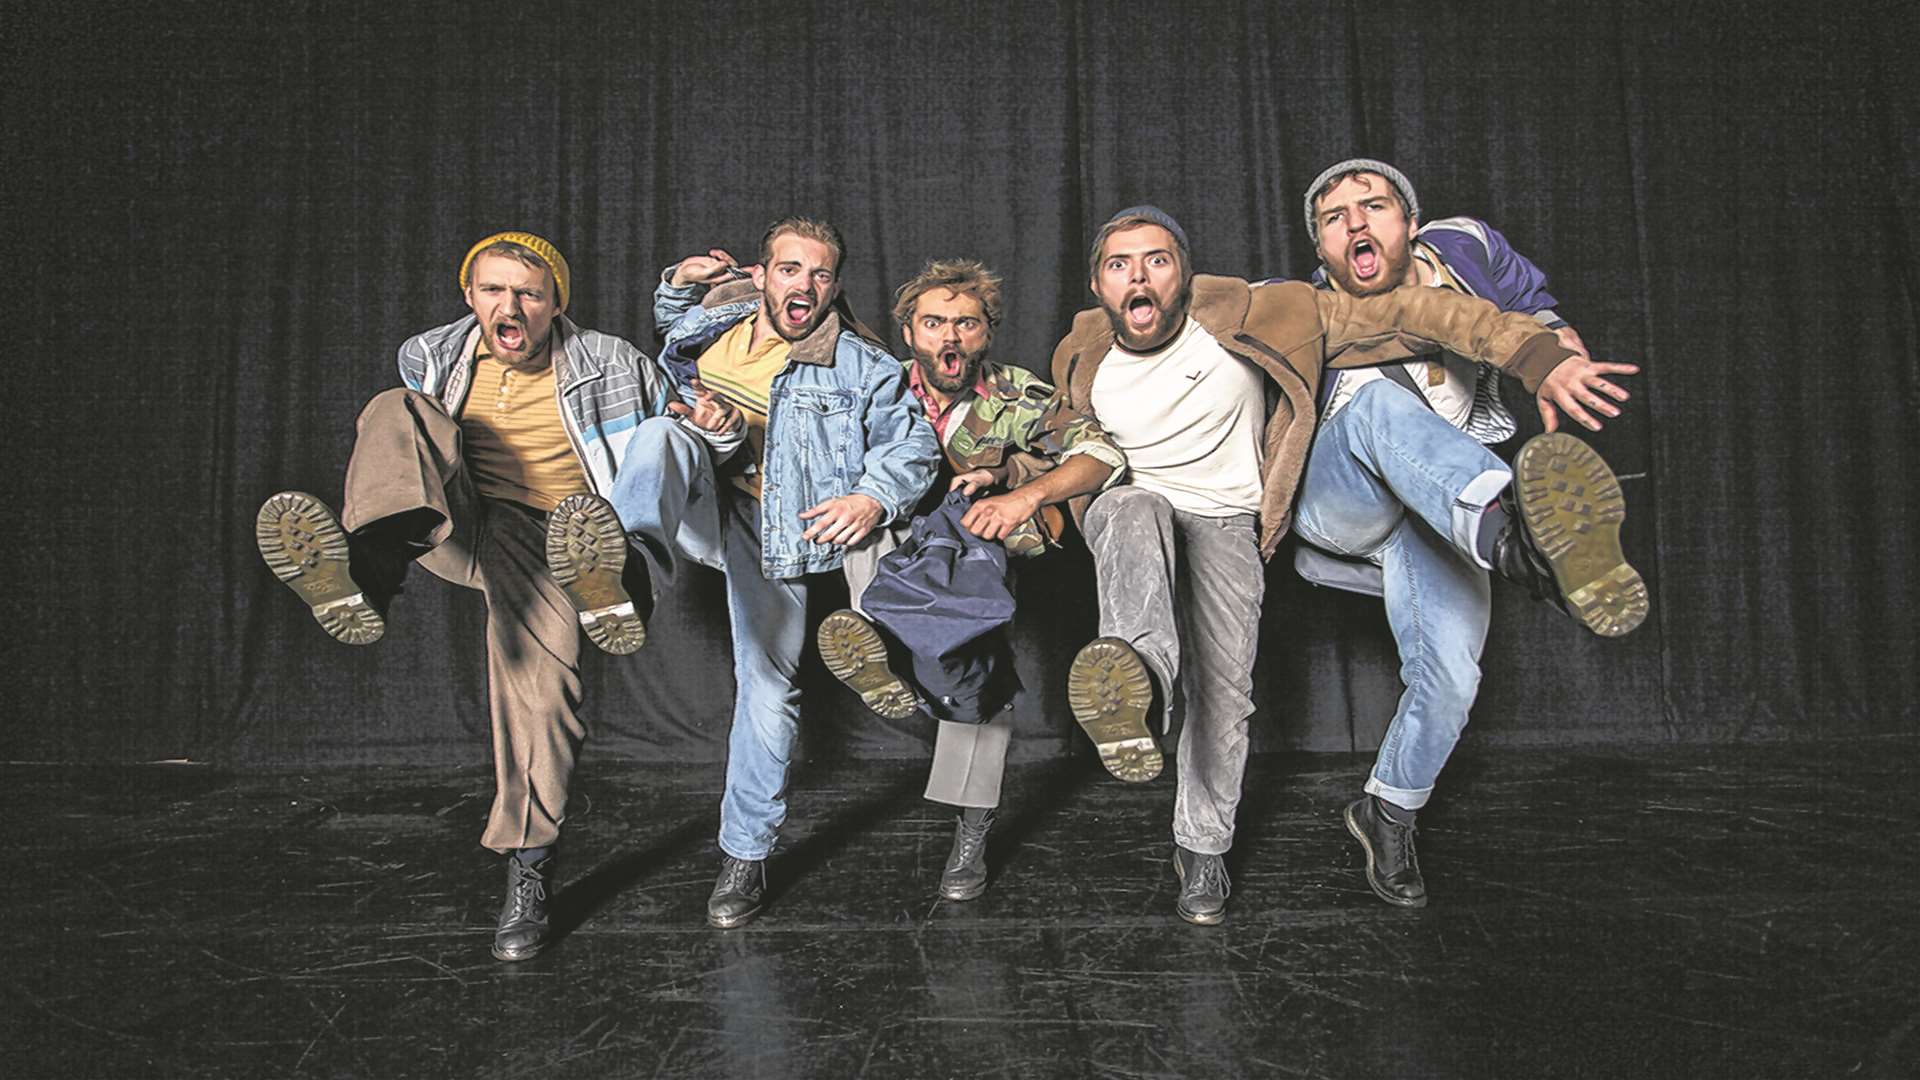 The dance theatre show focuses on the miners' strike